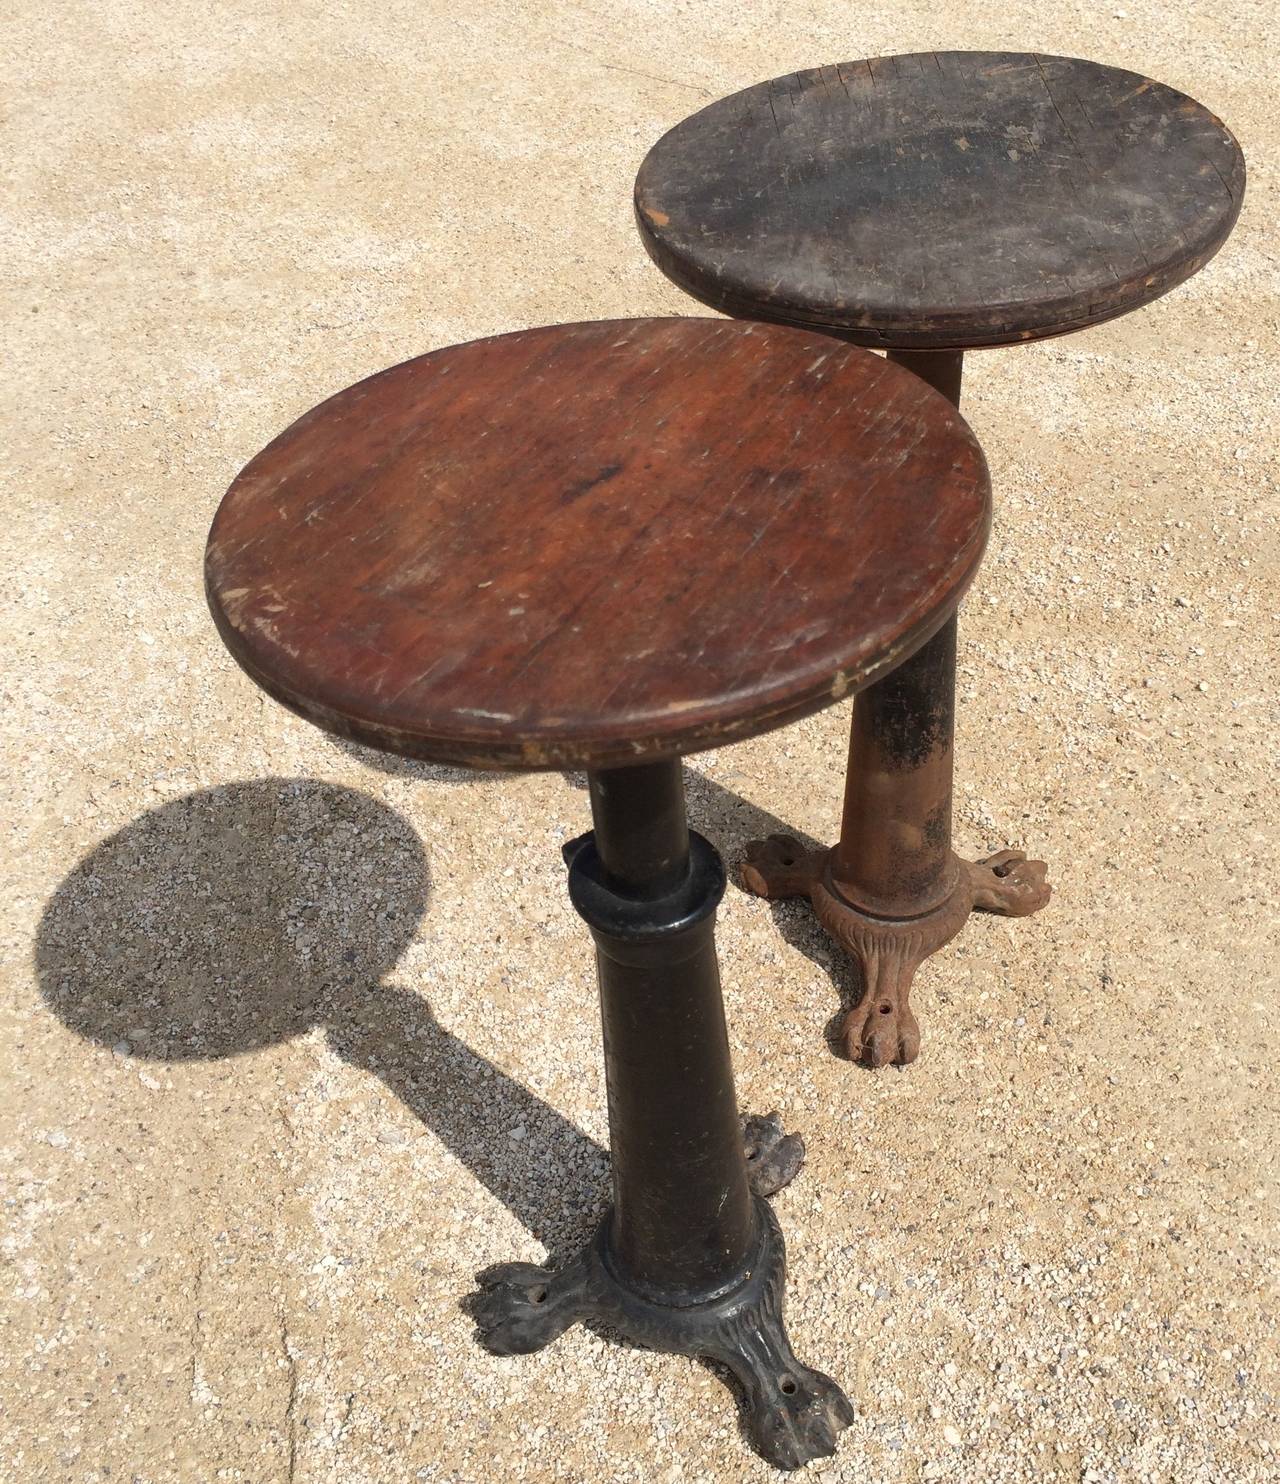 Three in total, all with the original round wooden seat and spiral adjust system, two unmarked, the one photographed singly with remnants of red paint and marked 